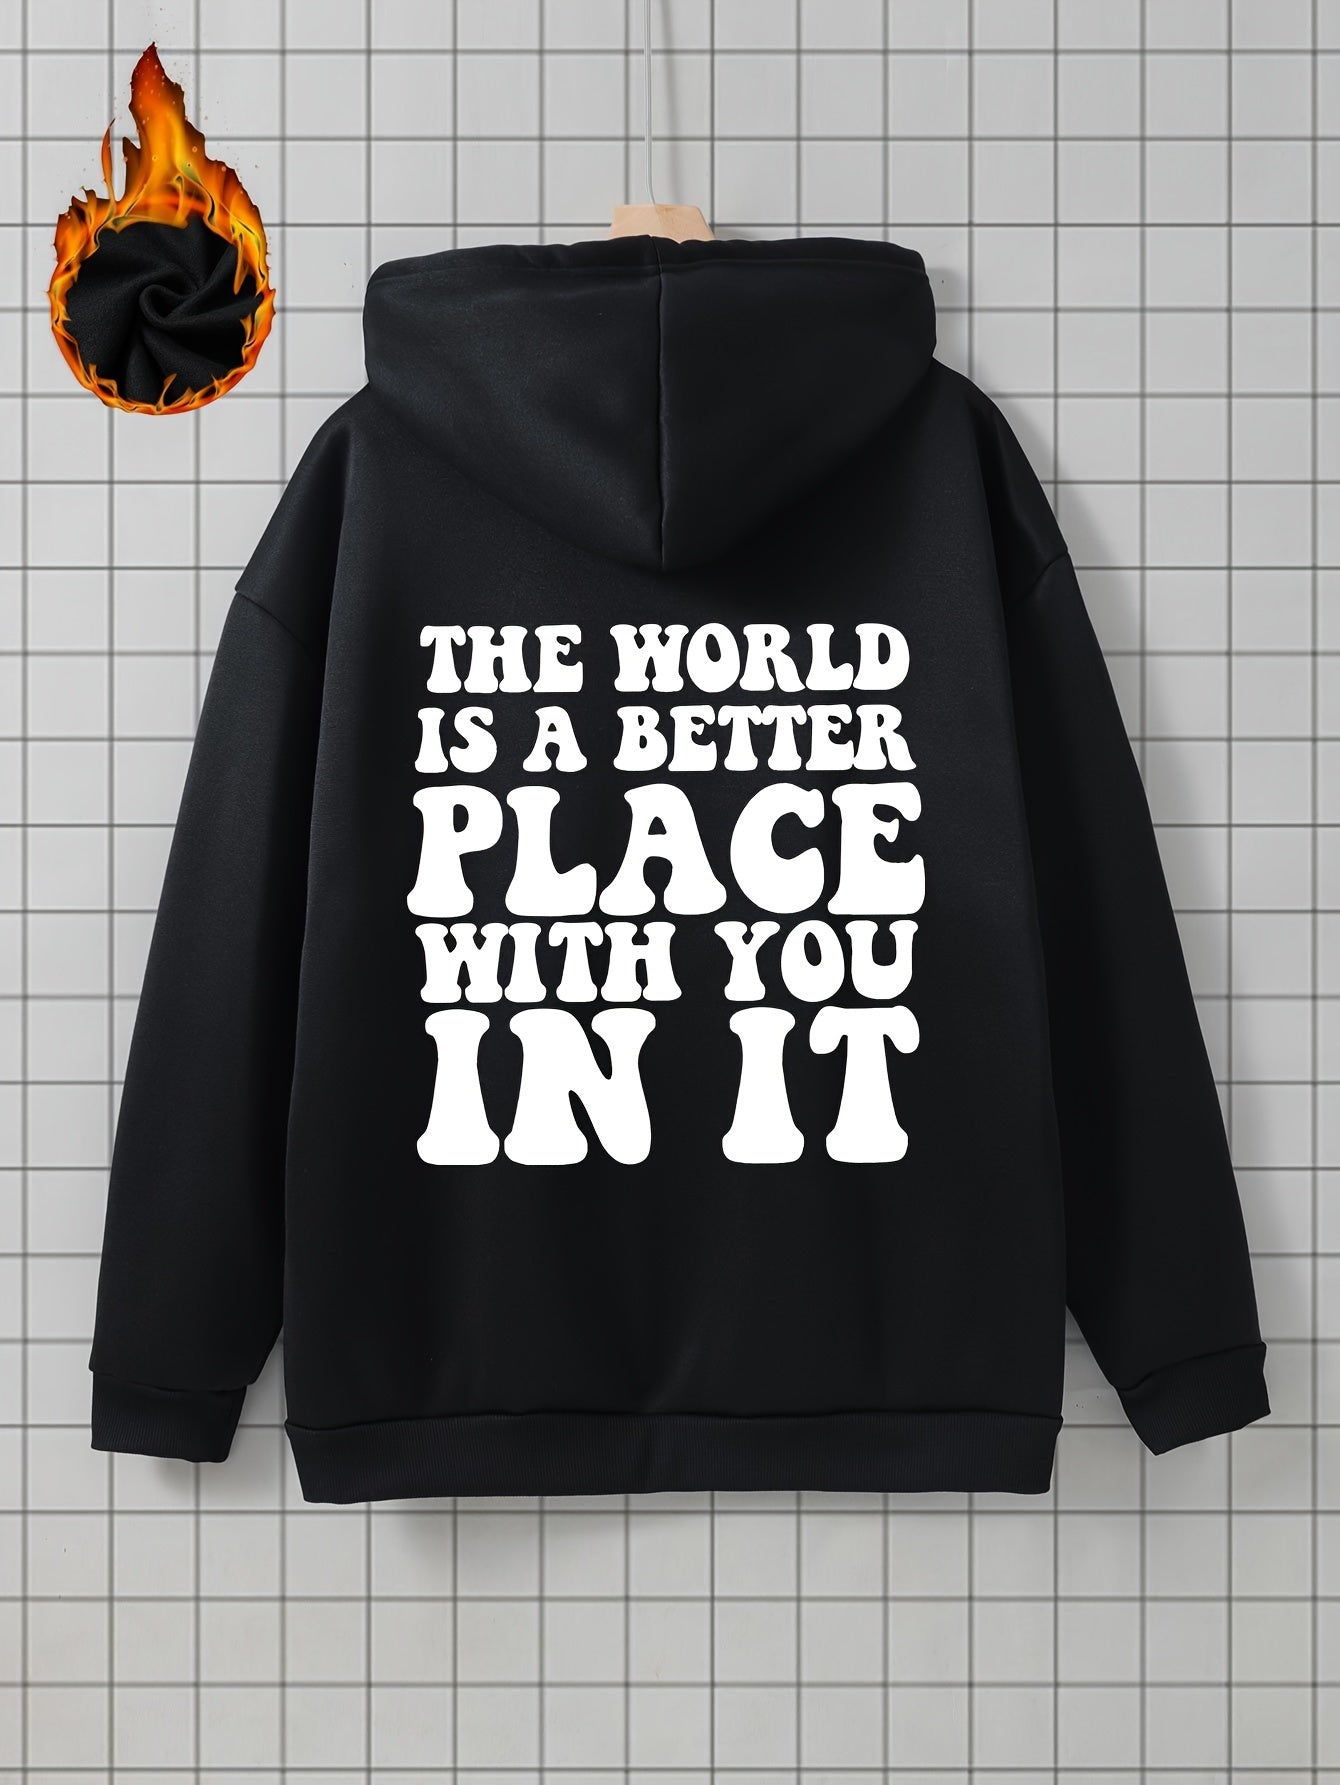 The World Is A Better Place With You In It Plus Size Women's Christian Pullover Hooded Sweatshirt claimedbygoddesigns